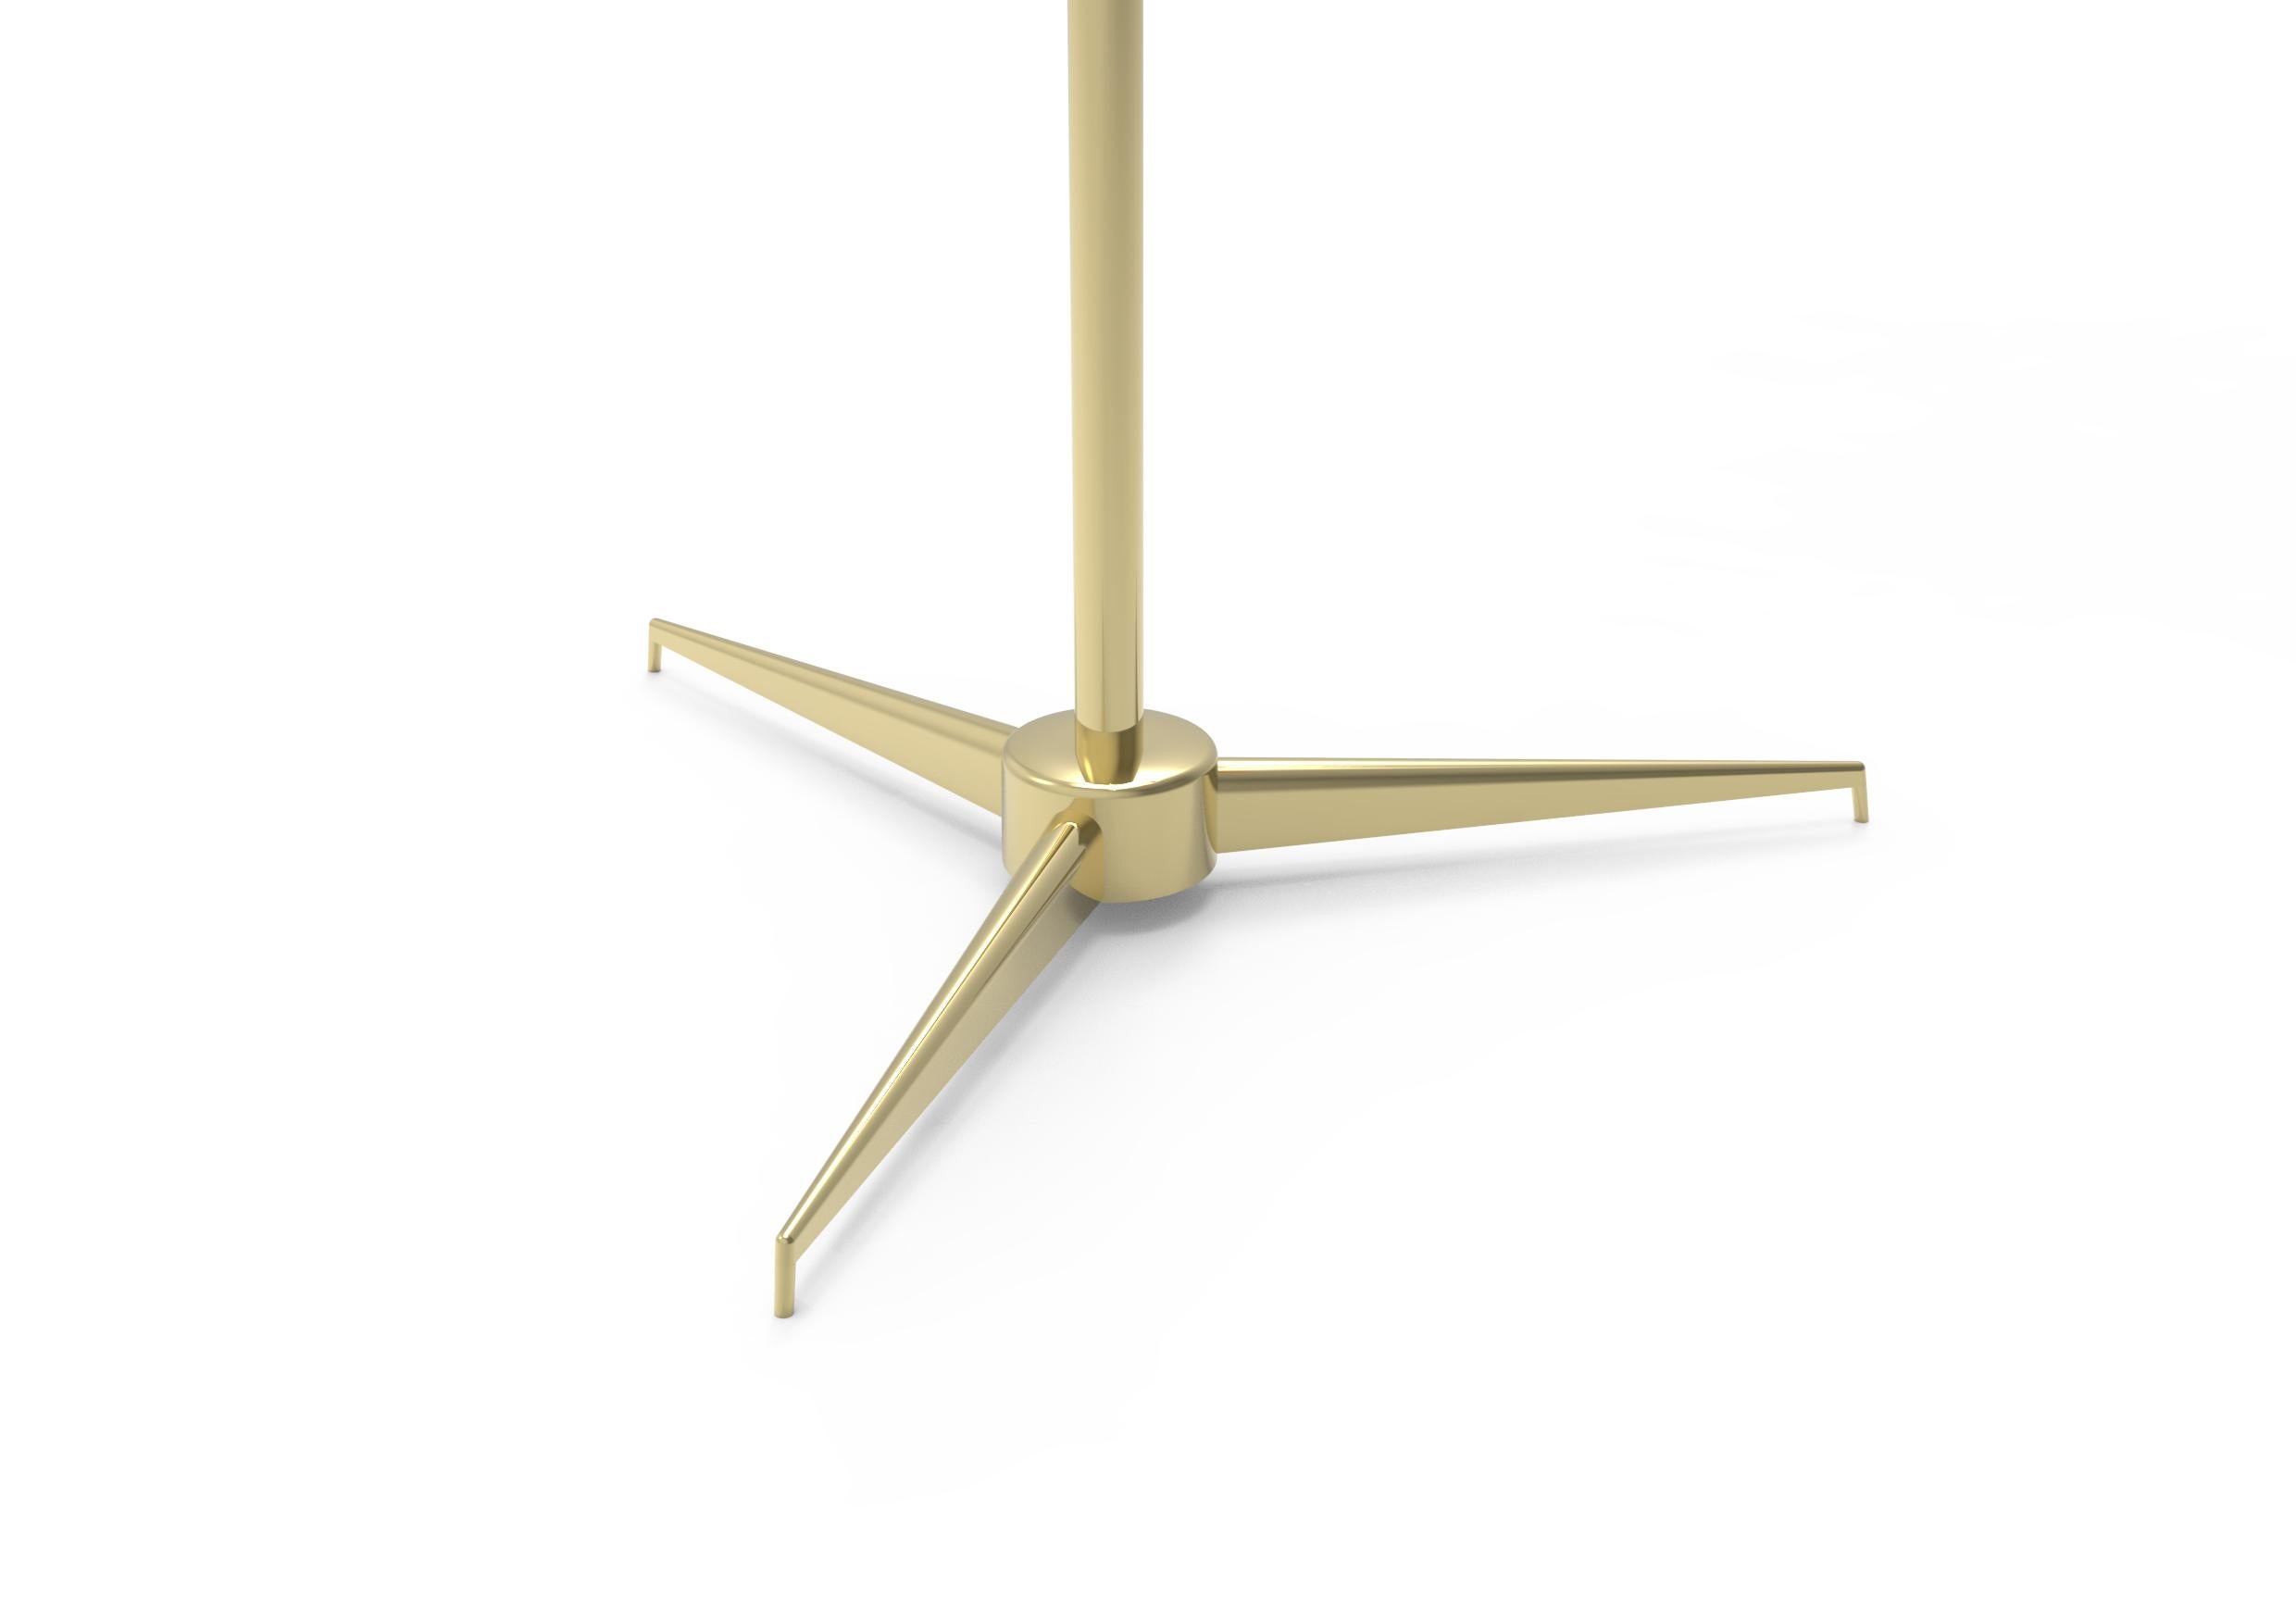 Icon of Arredoluce, symbol of an era and source of inspiration for many objects to follow over time, Triennale is perhaps the best known project by Angelo Lellii. Presented at the VII Milan Triennale in 1947, it is a floor lamp with a brass linear